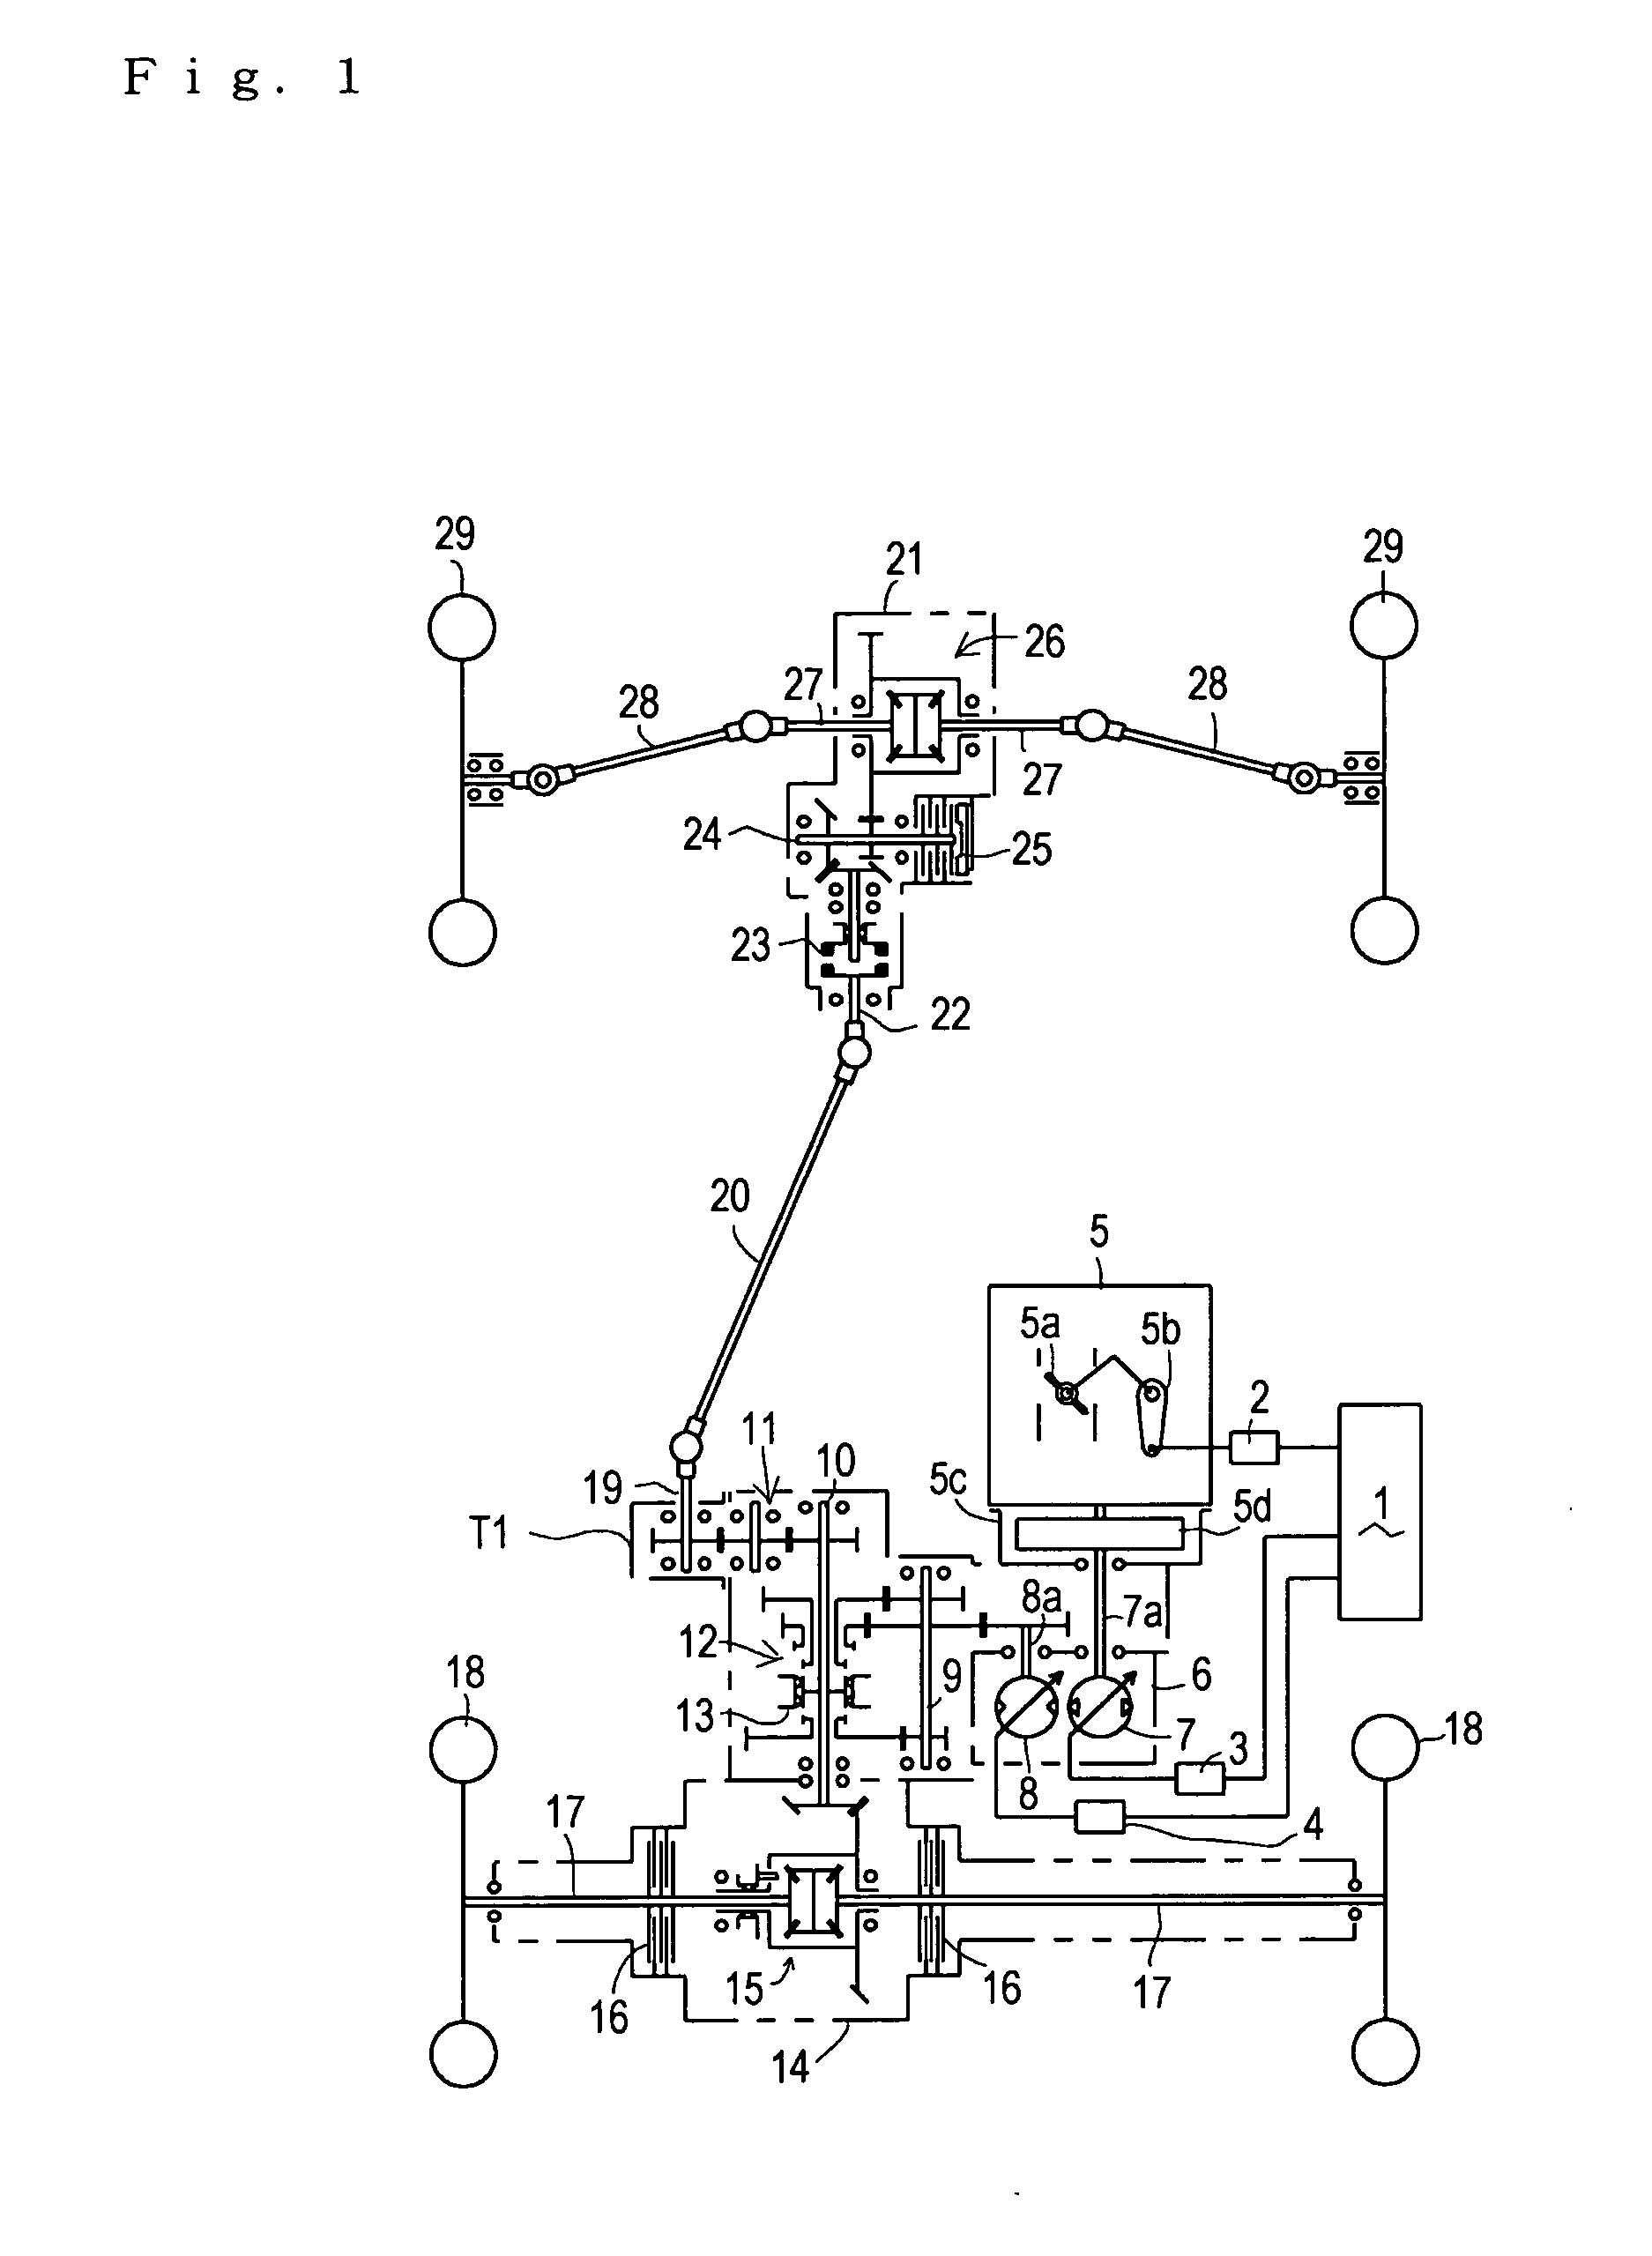 Speed control method for working vehicle